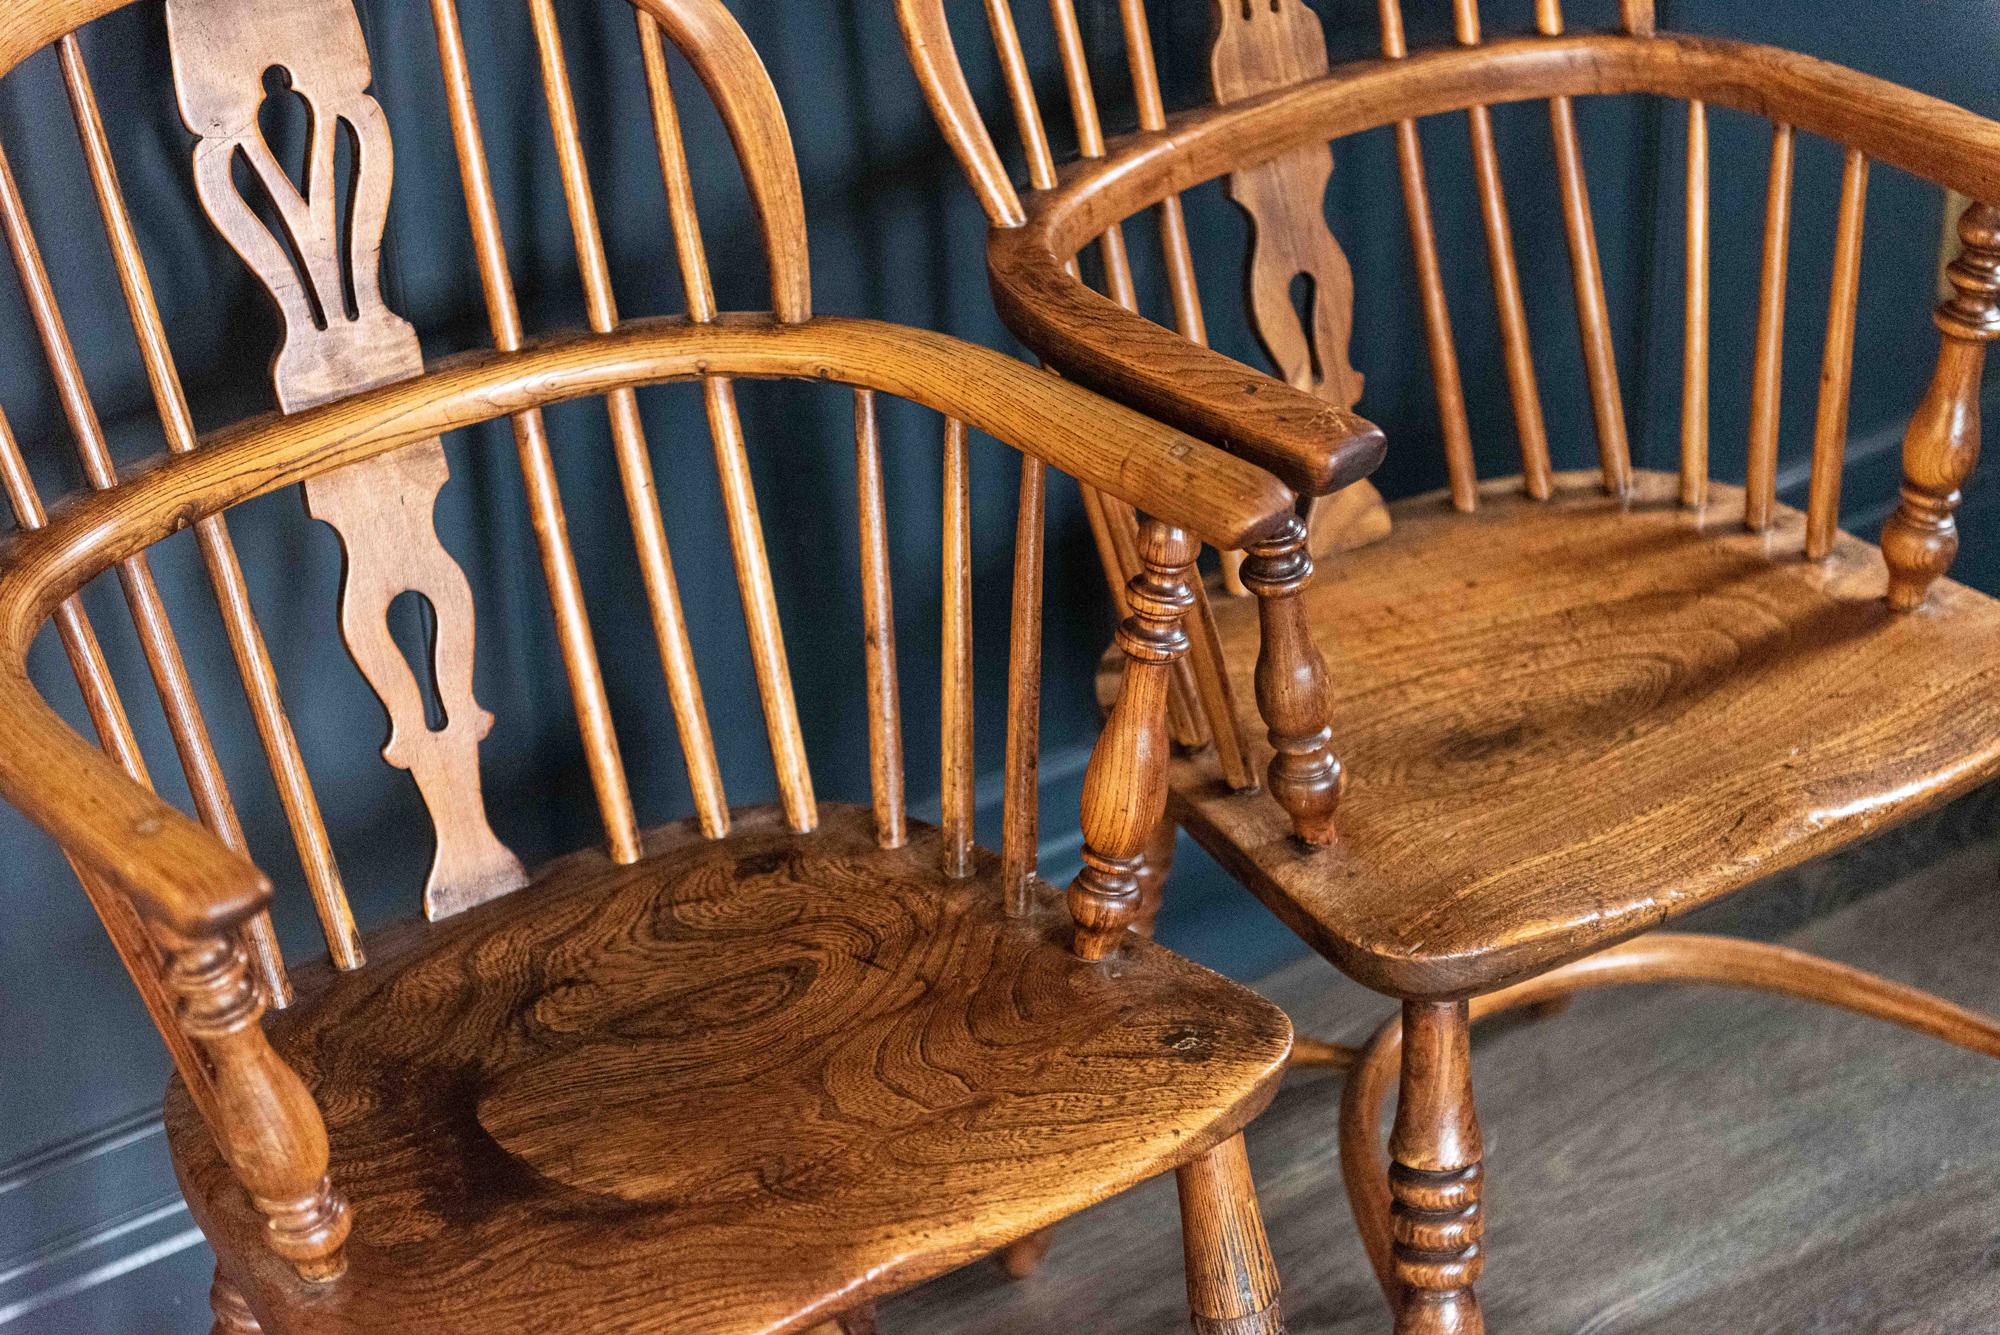 Pair of English 19th century Windsor chairs with open fret splats with turned supports and legs with crinoline stretchers.
Ash with elm seats, lovely wear, color and patina, circa 1835.

Price is for the pair

Measures: H 91 x 47.5 W x D 50 S/H